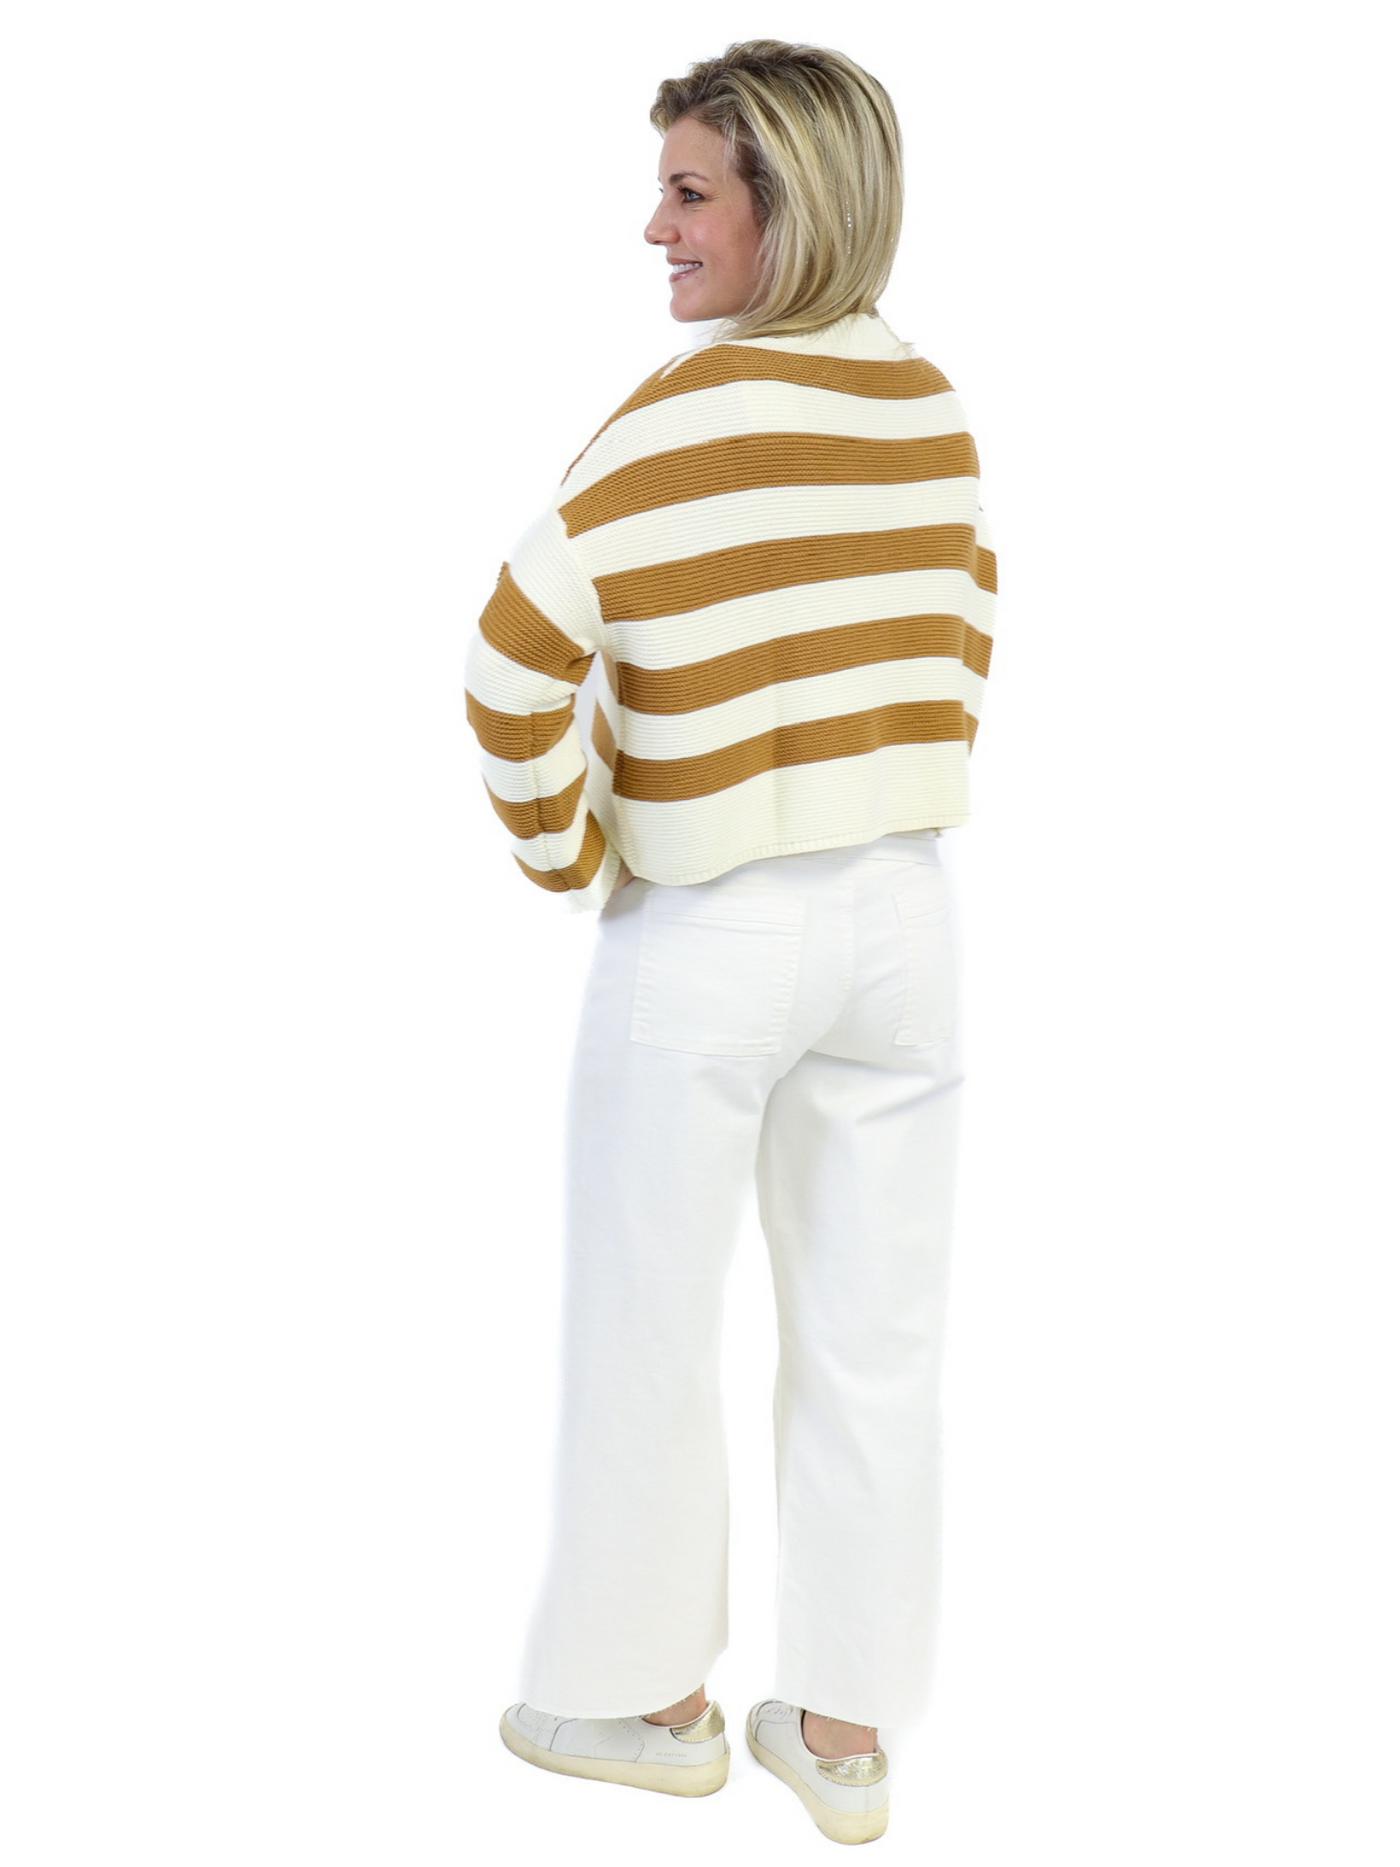 Stripe Knit Sweater - Toffee back view.